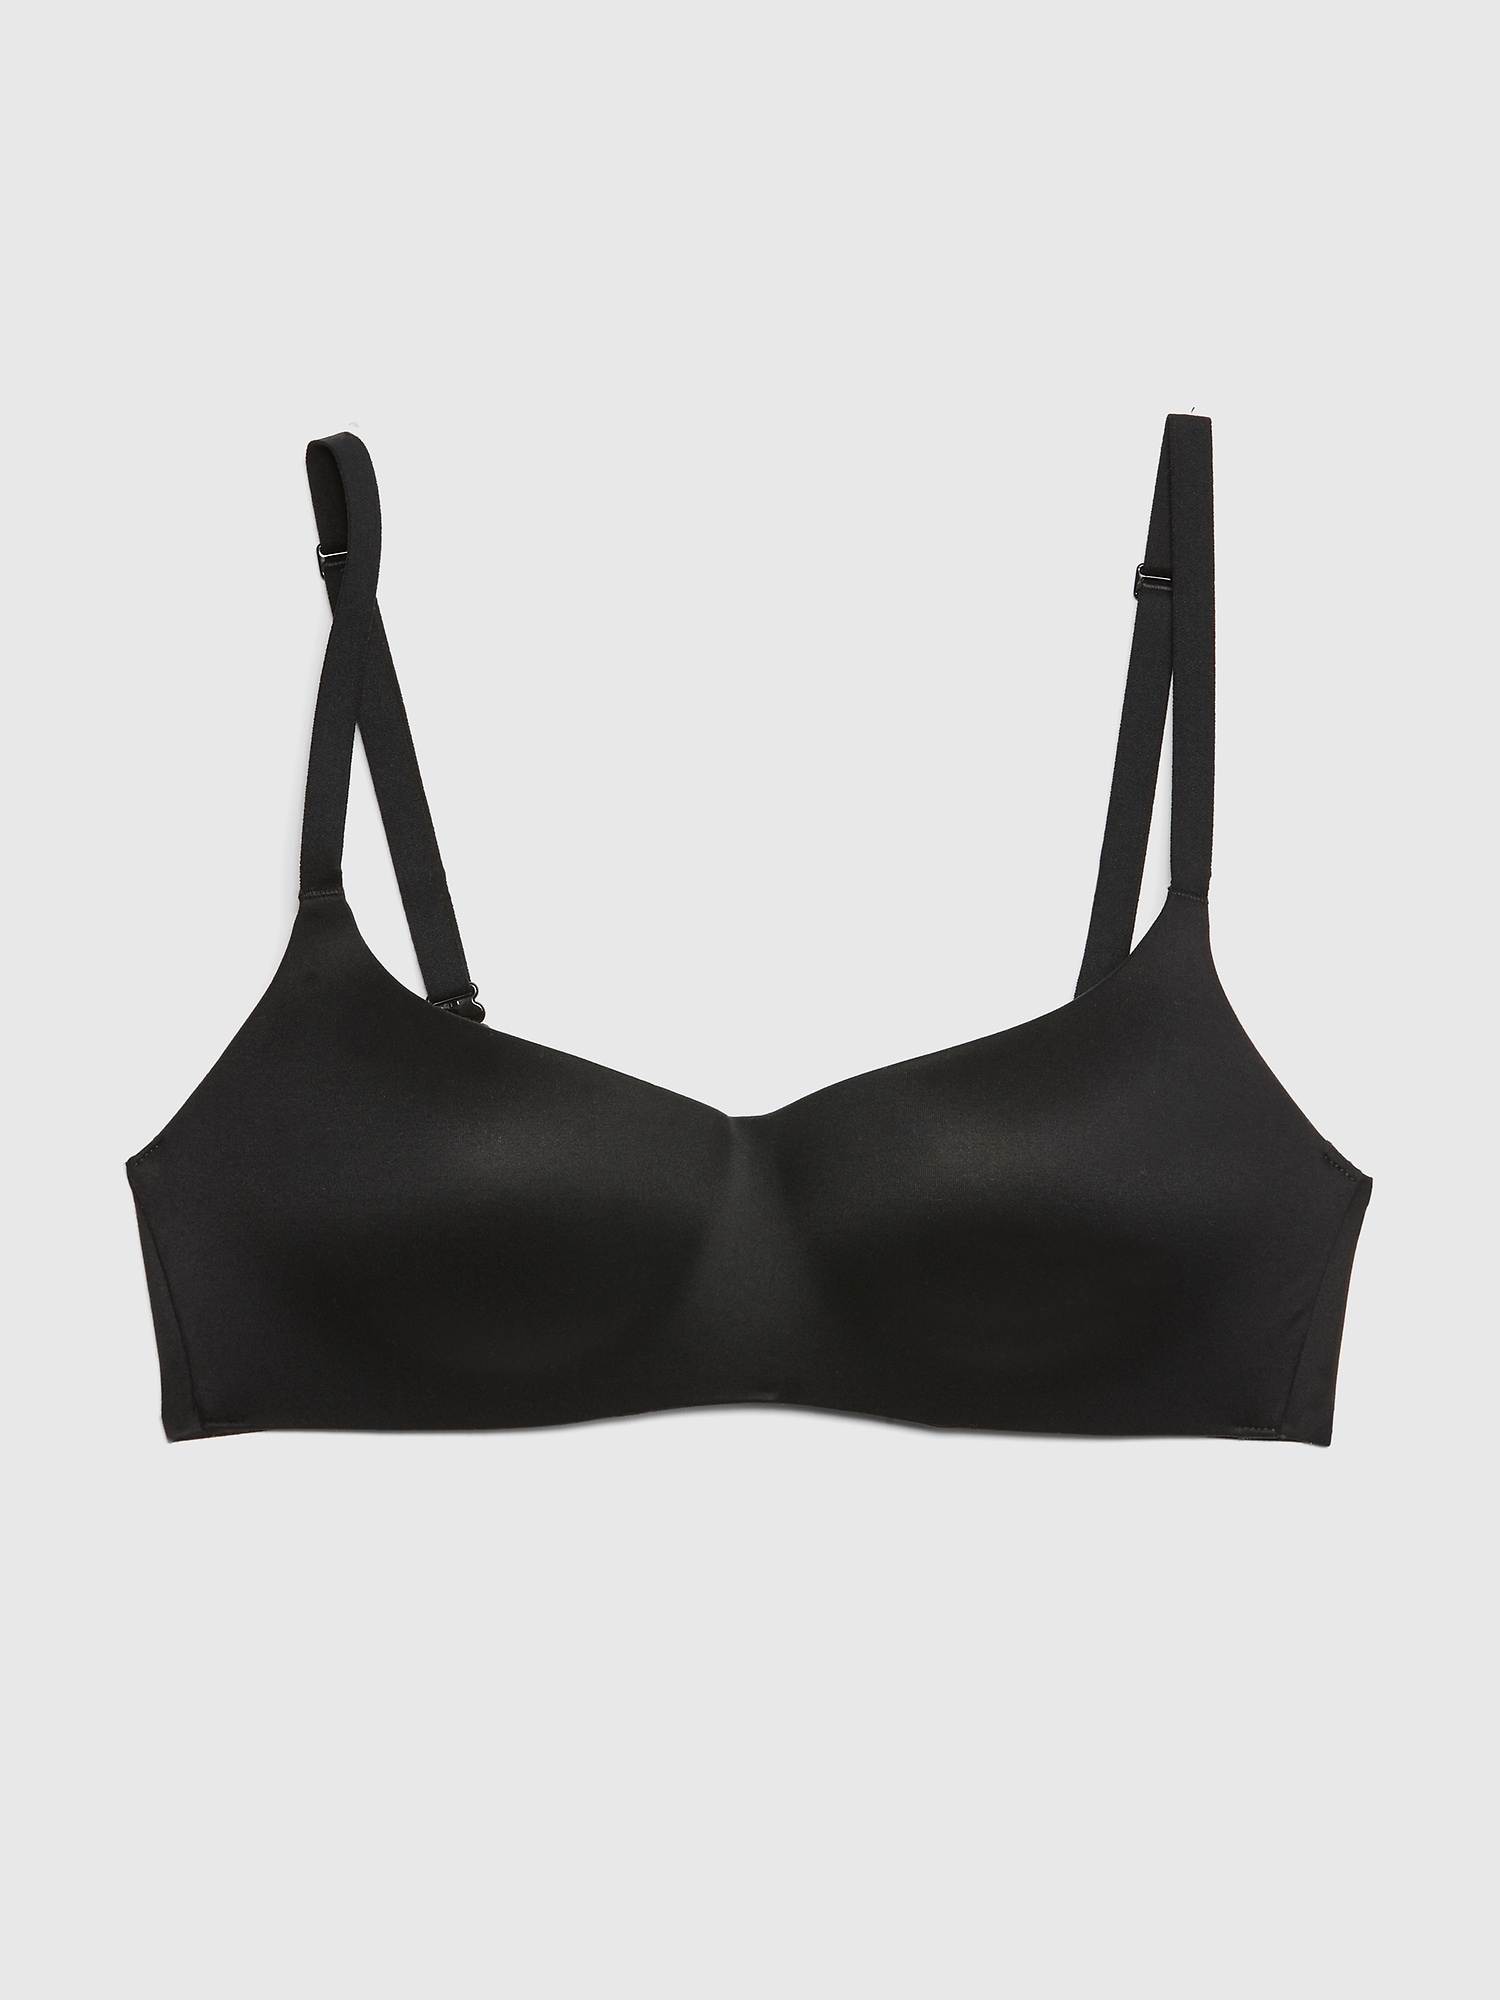 I have 38C boobs – I've had the same strapless bra for six years